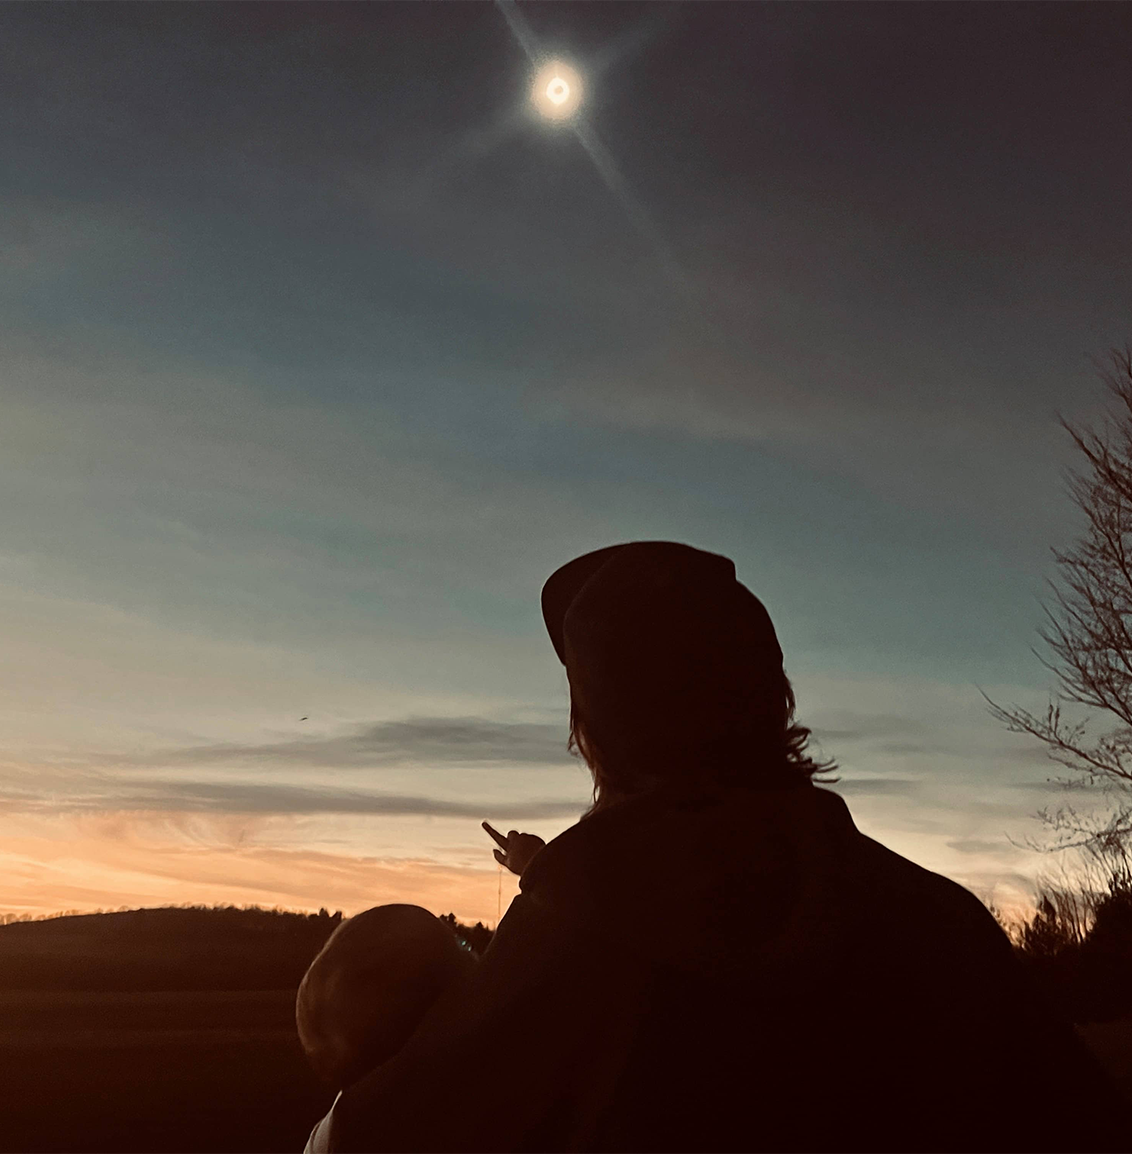 man holding baby looking at eclipse in night sky